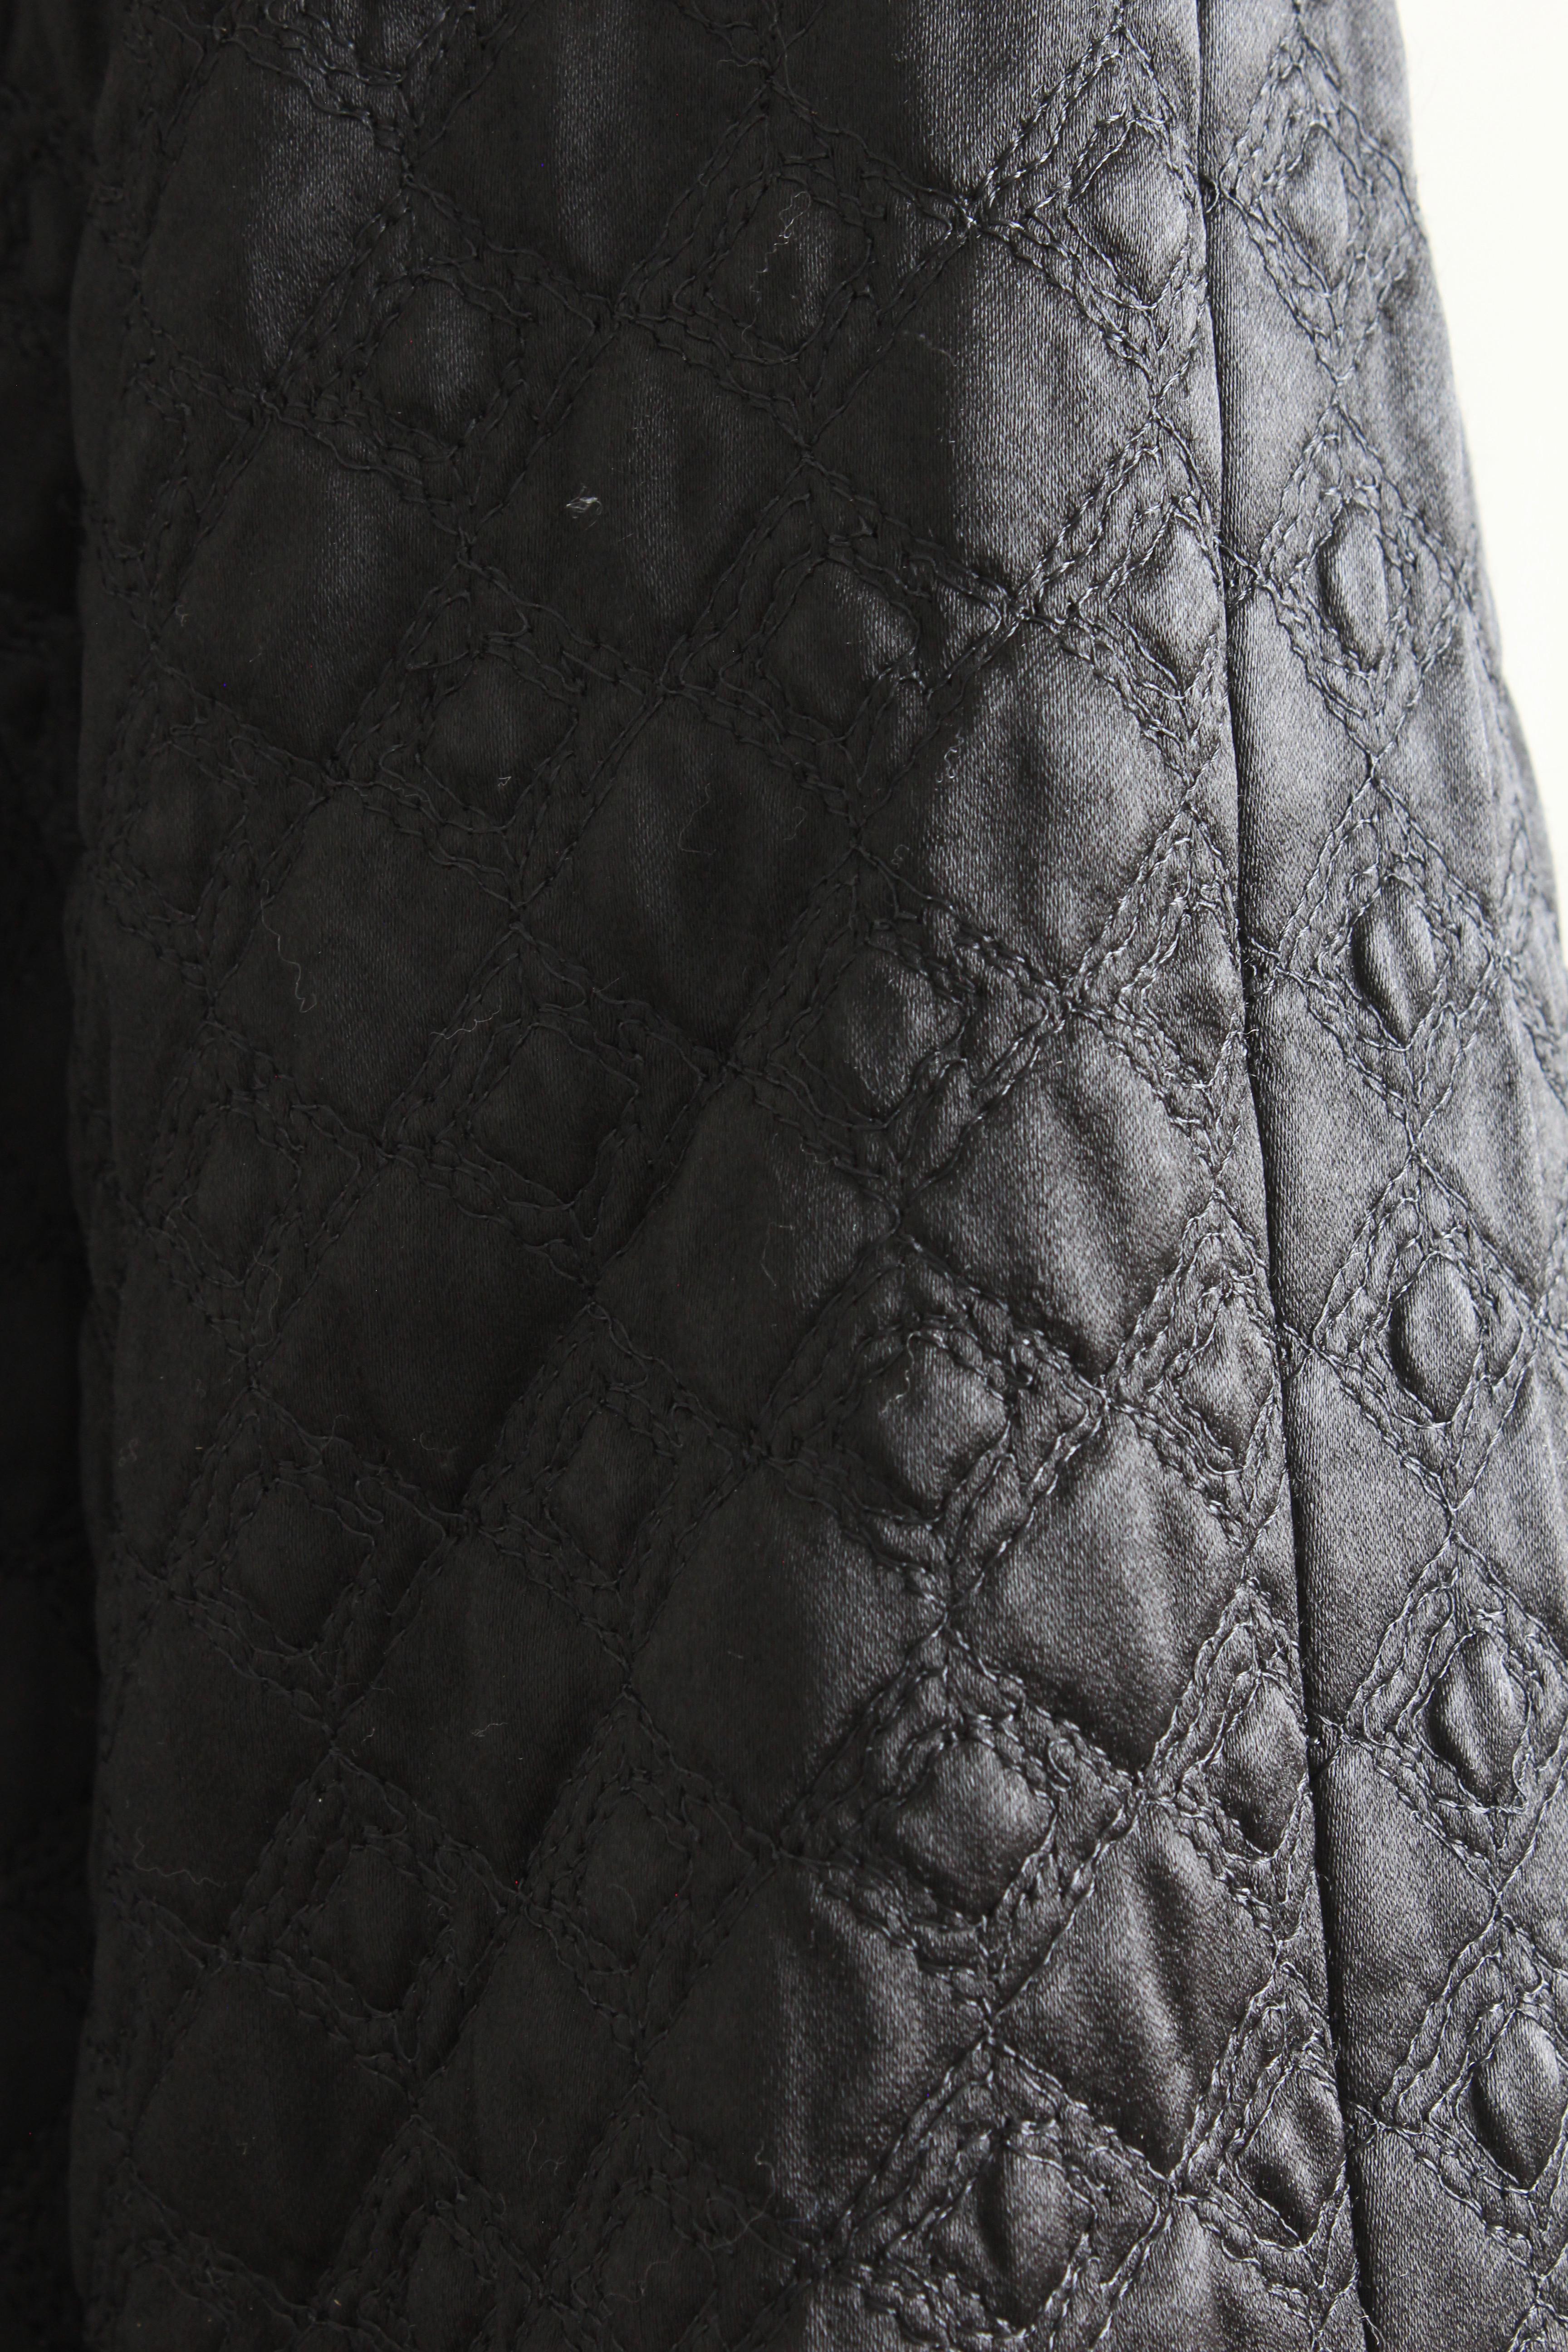 Gianni Versace Jacket or Swing Coat Diamond Quilted Black Satin with Fur Trim 38 4